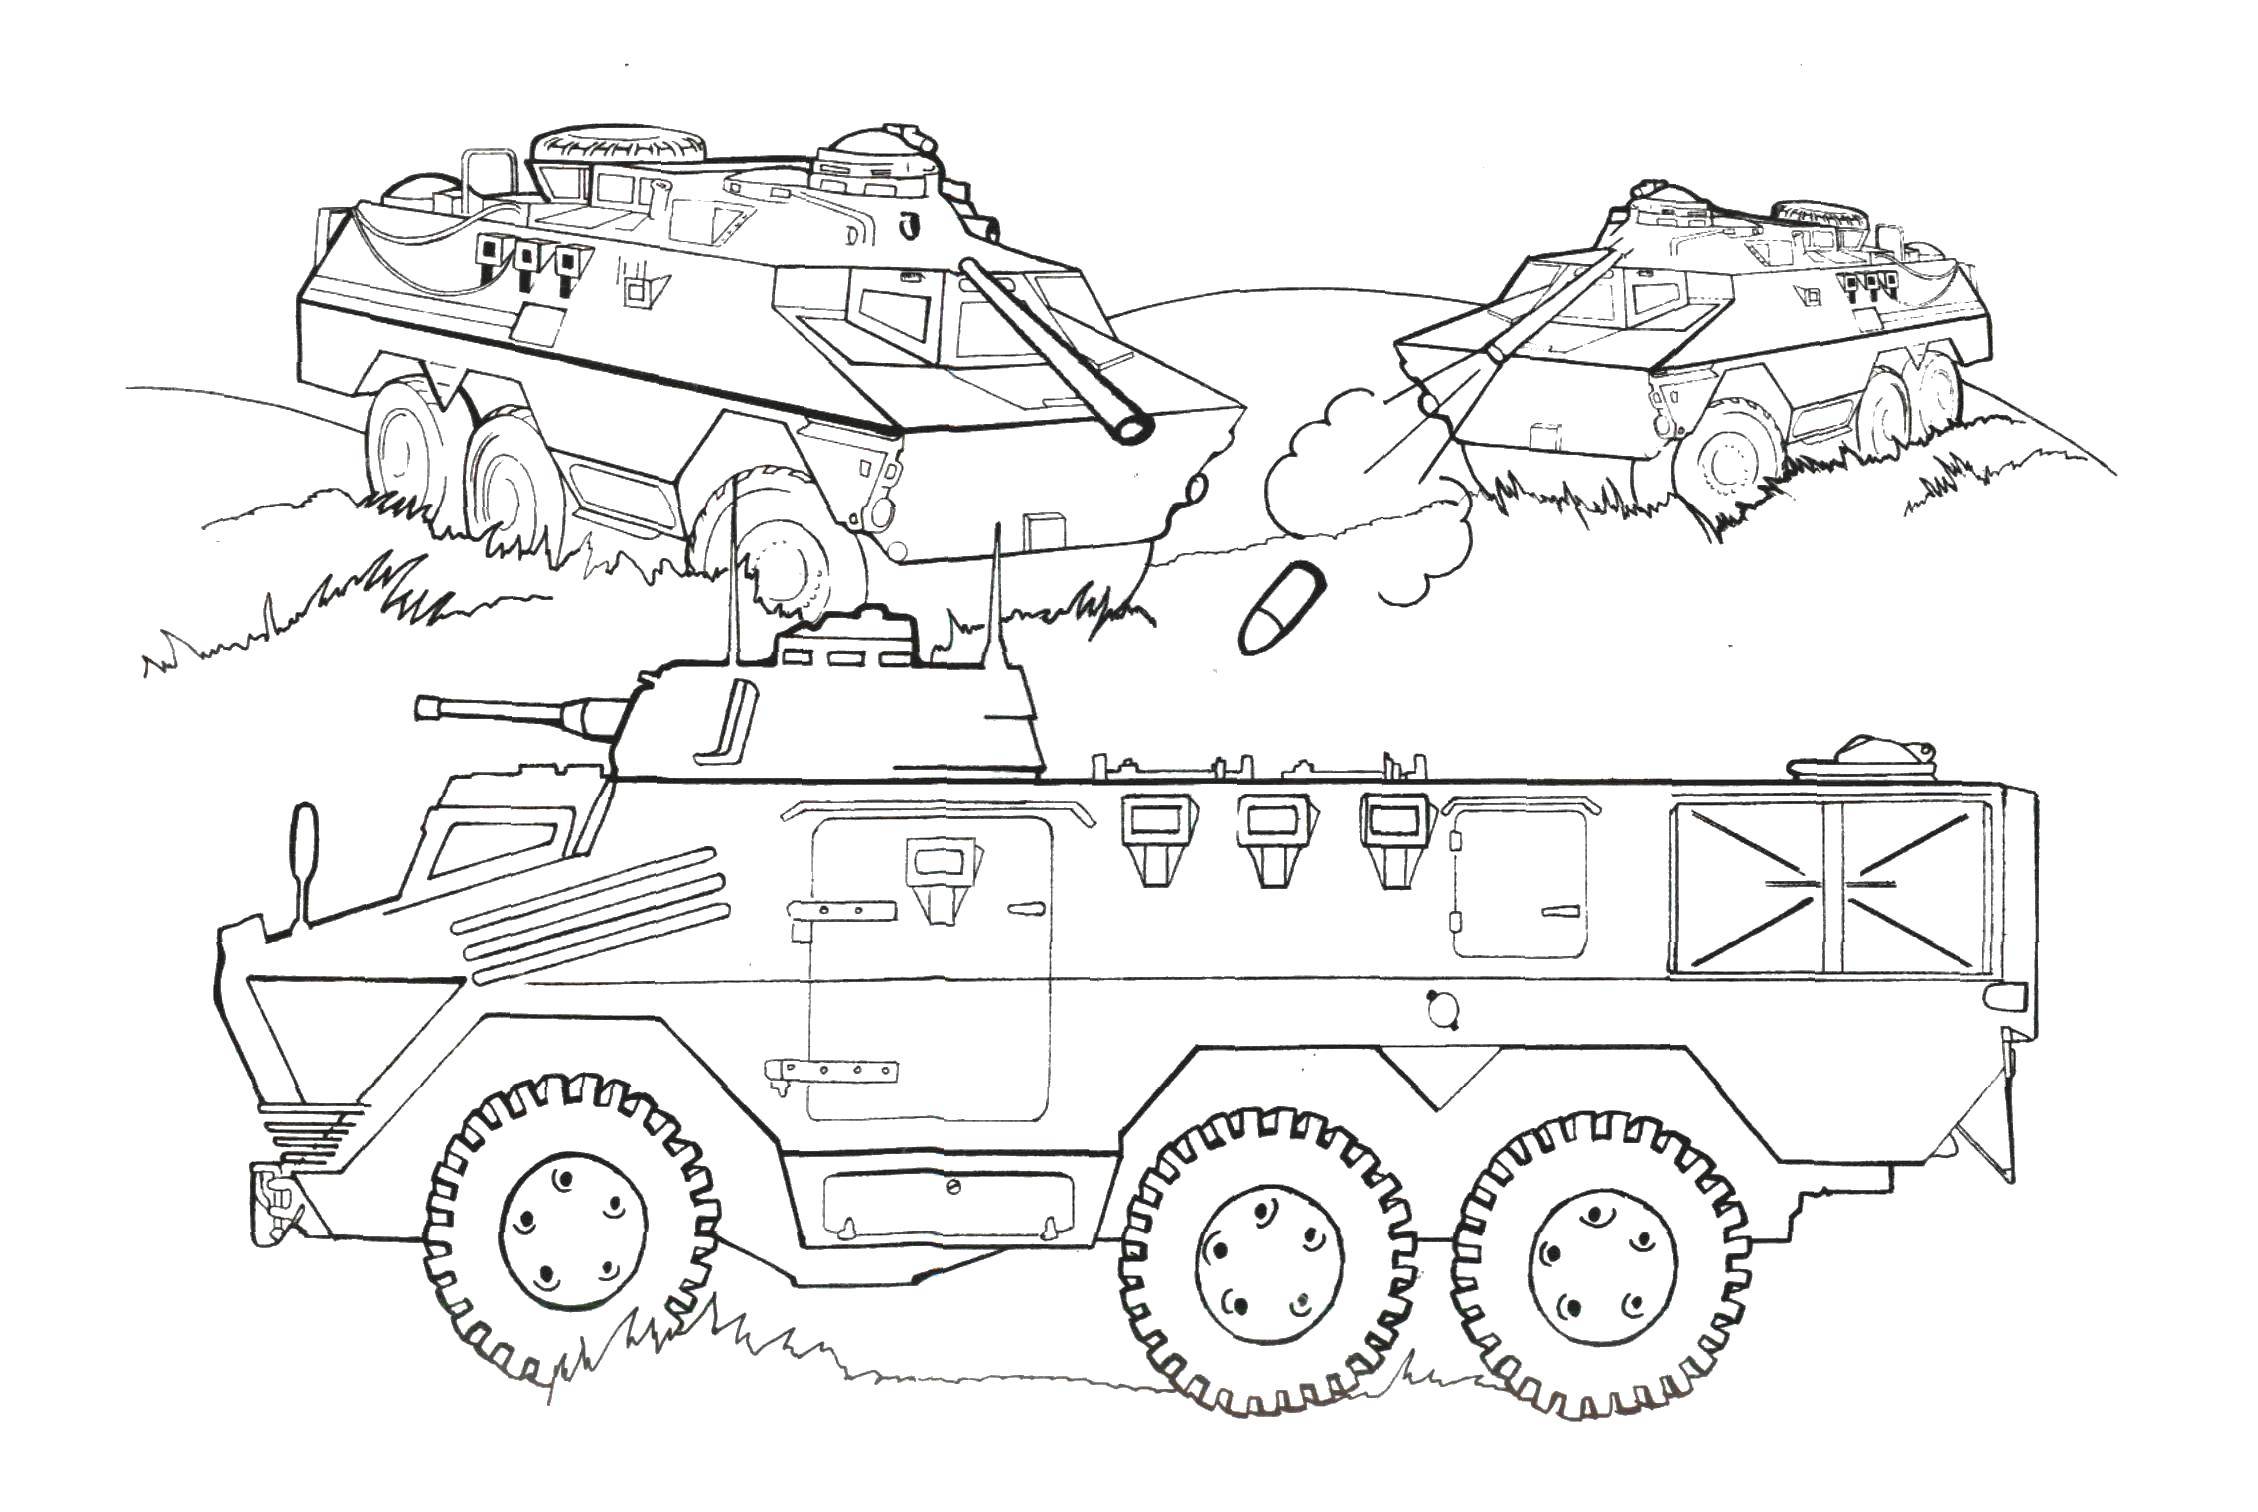 Coloring Combat vehicle. Category military. Tags:  Military, vehicles, tank, arms.